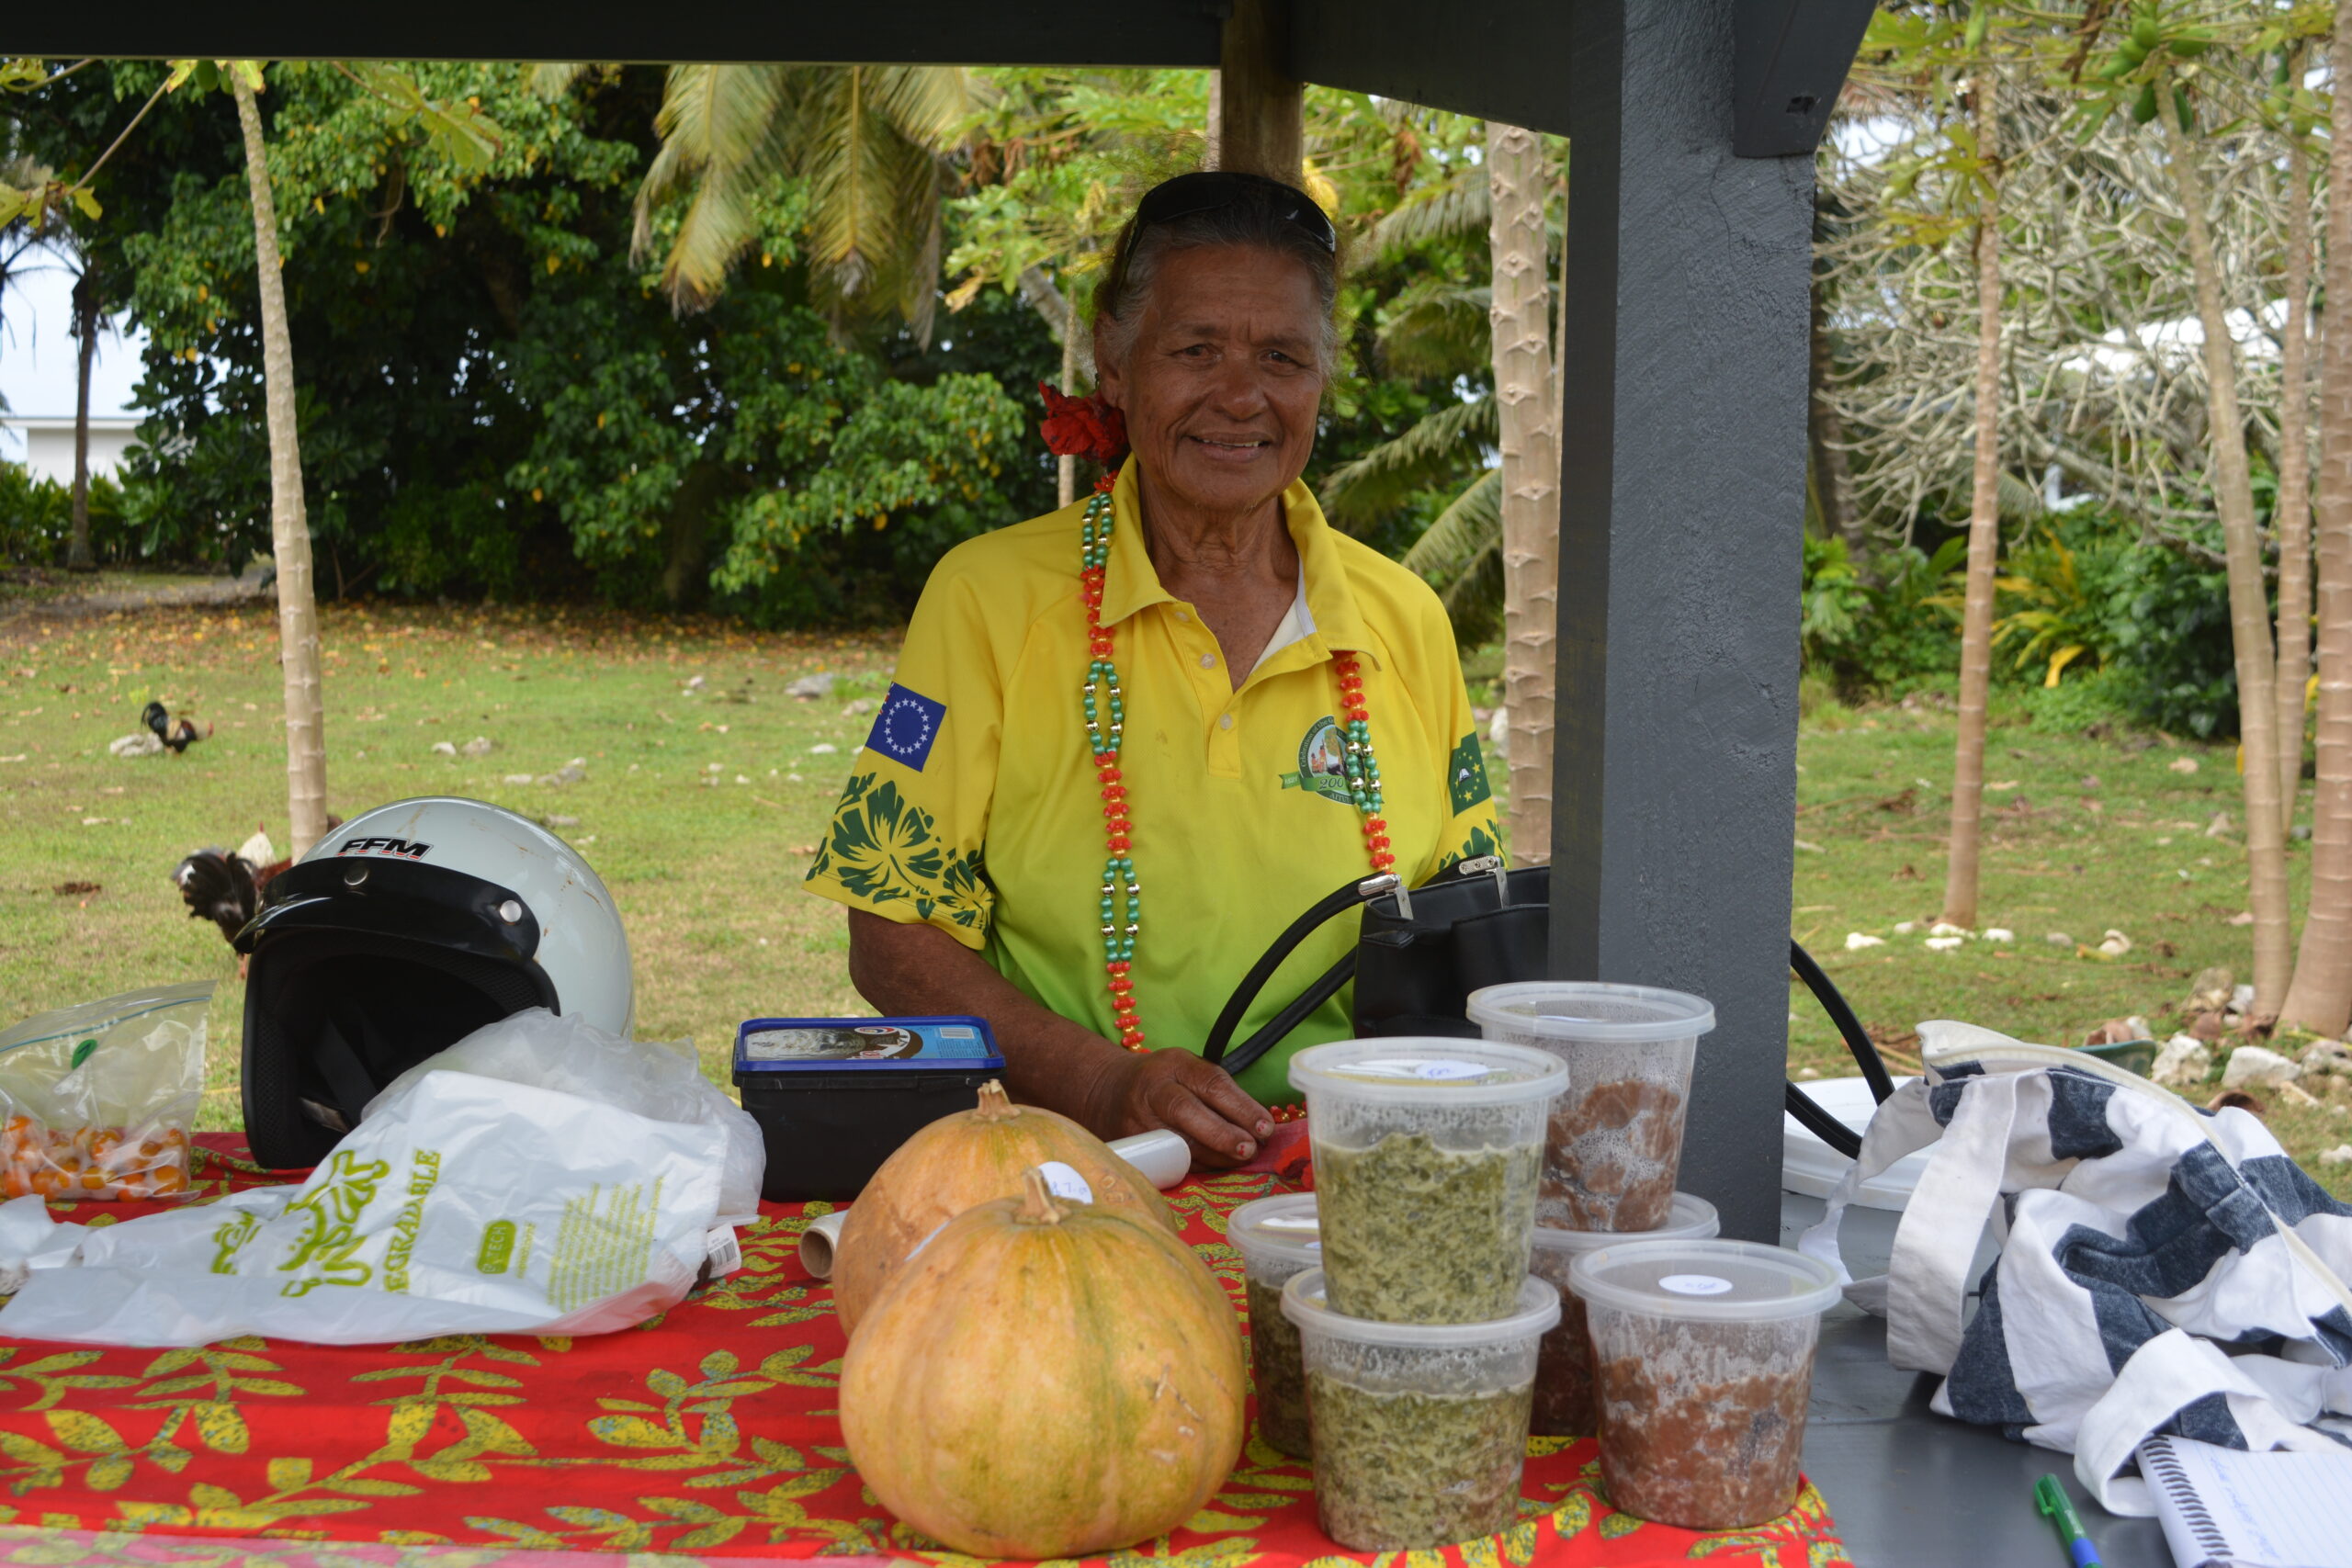 Vendors invited to showcase Cook Islands products at Pacific Islands Forum event